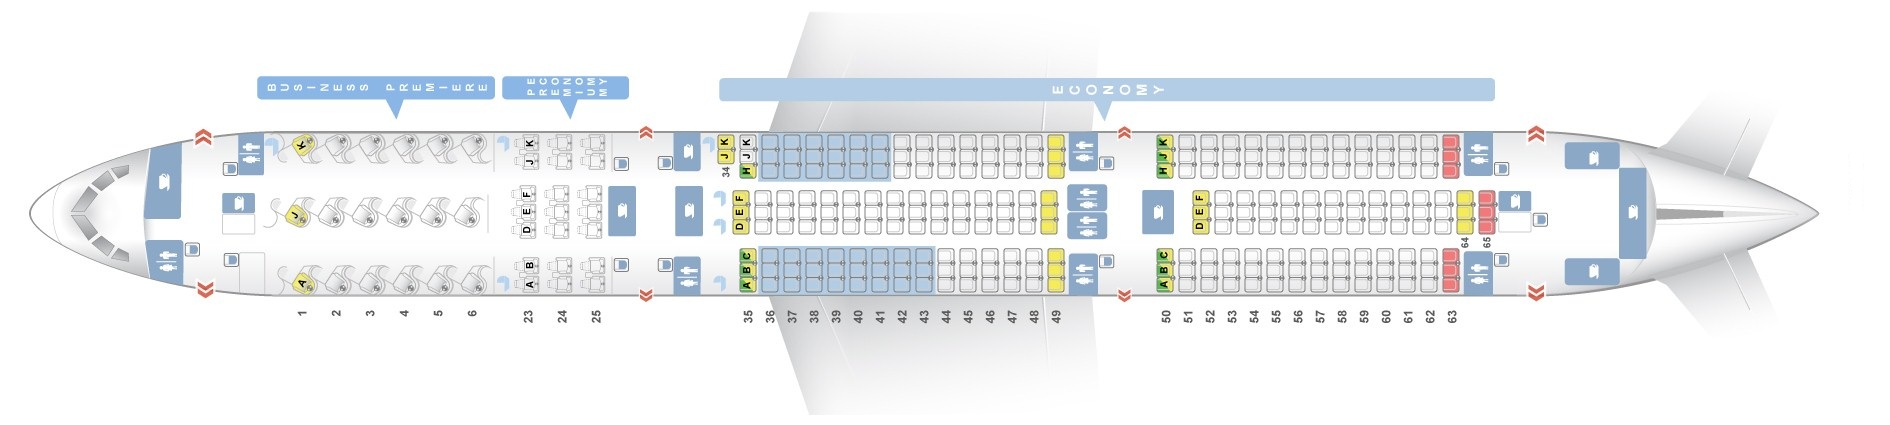 Seat map Boeing 787-9 Dreamliner Air New Zealand. Best seats in the plane